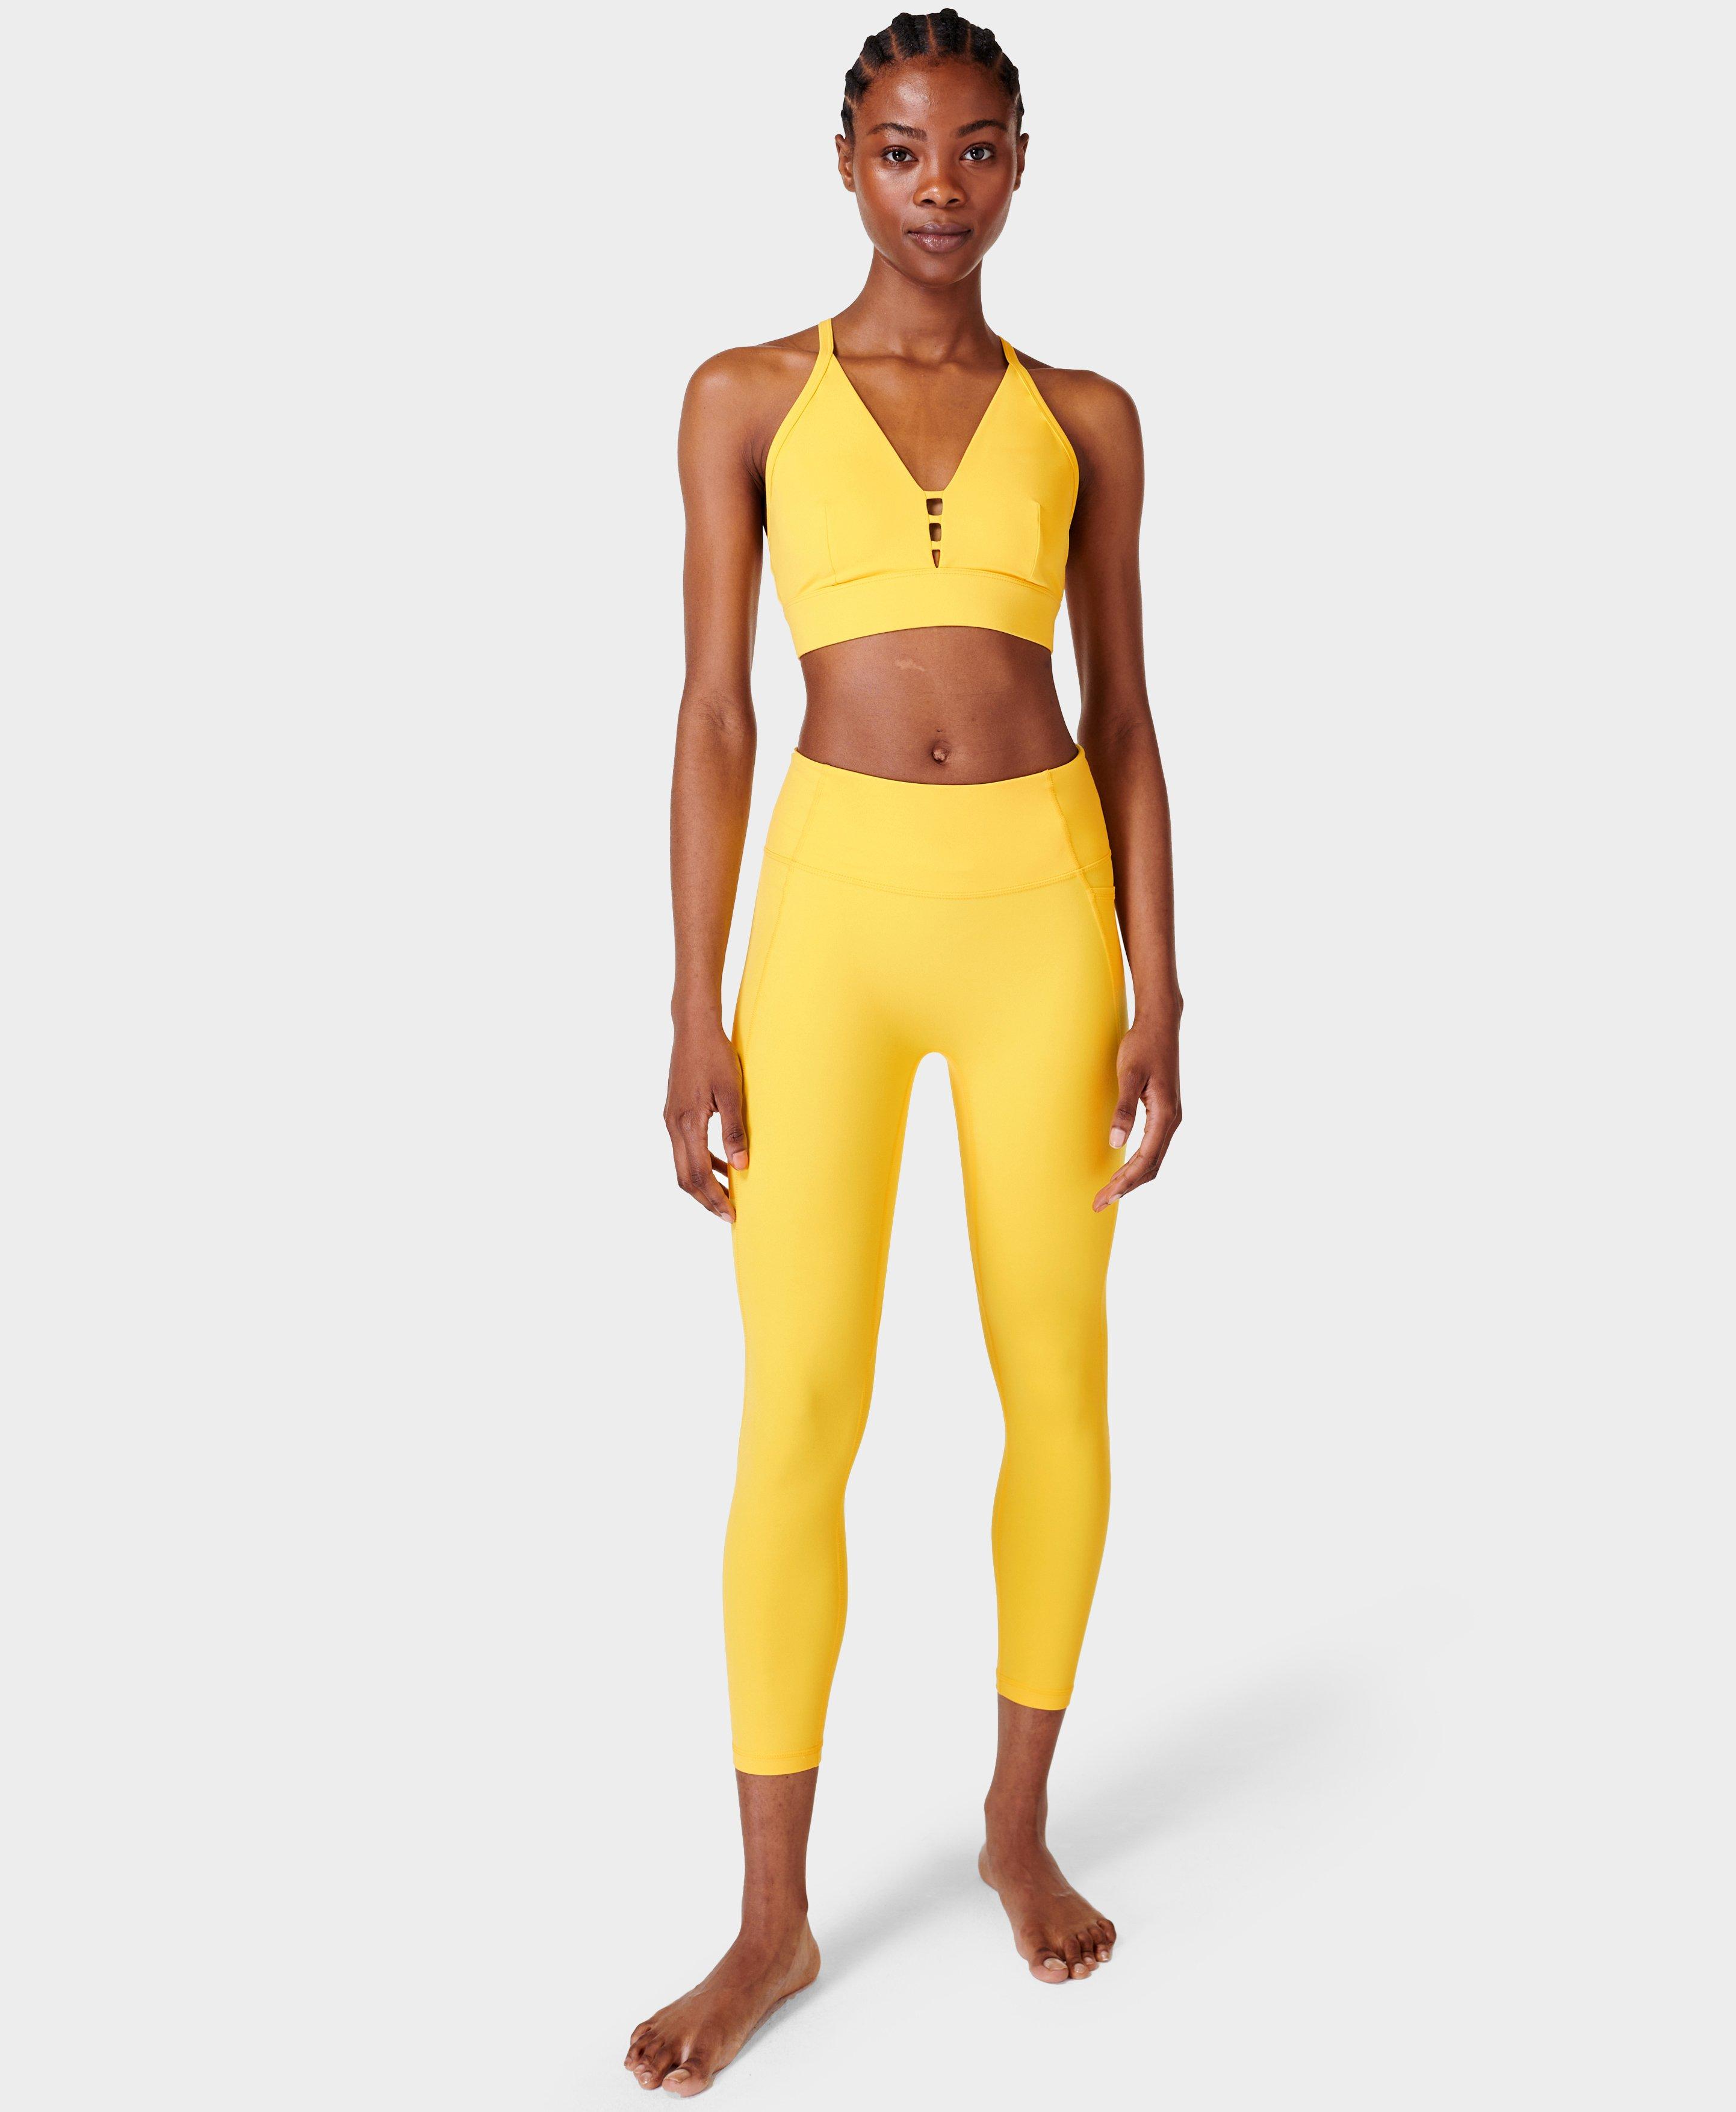 Super Soft 7/8 Leggings Colour Theory - Cheerful Yellow